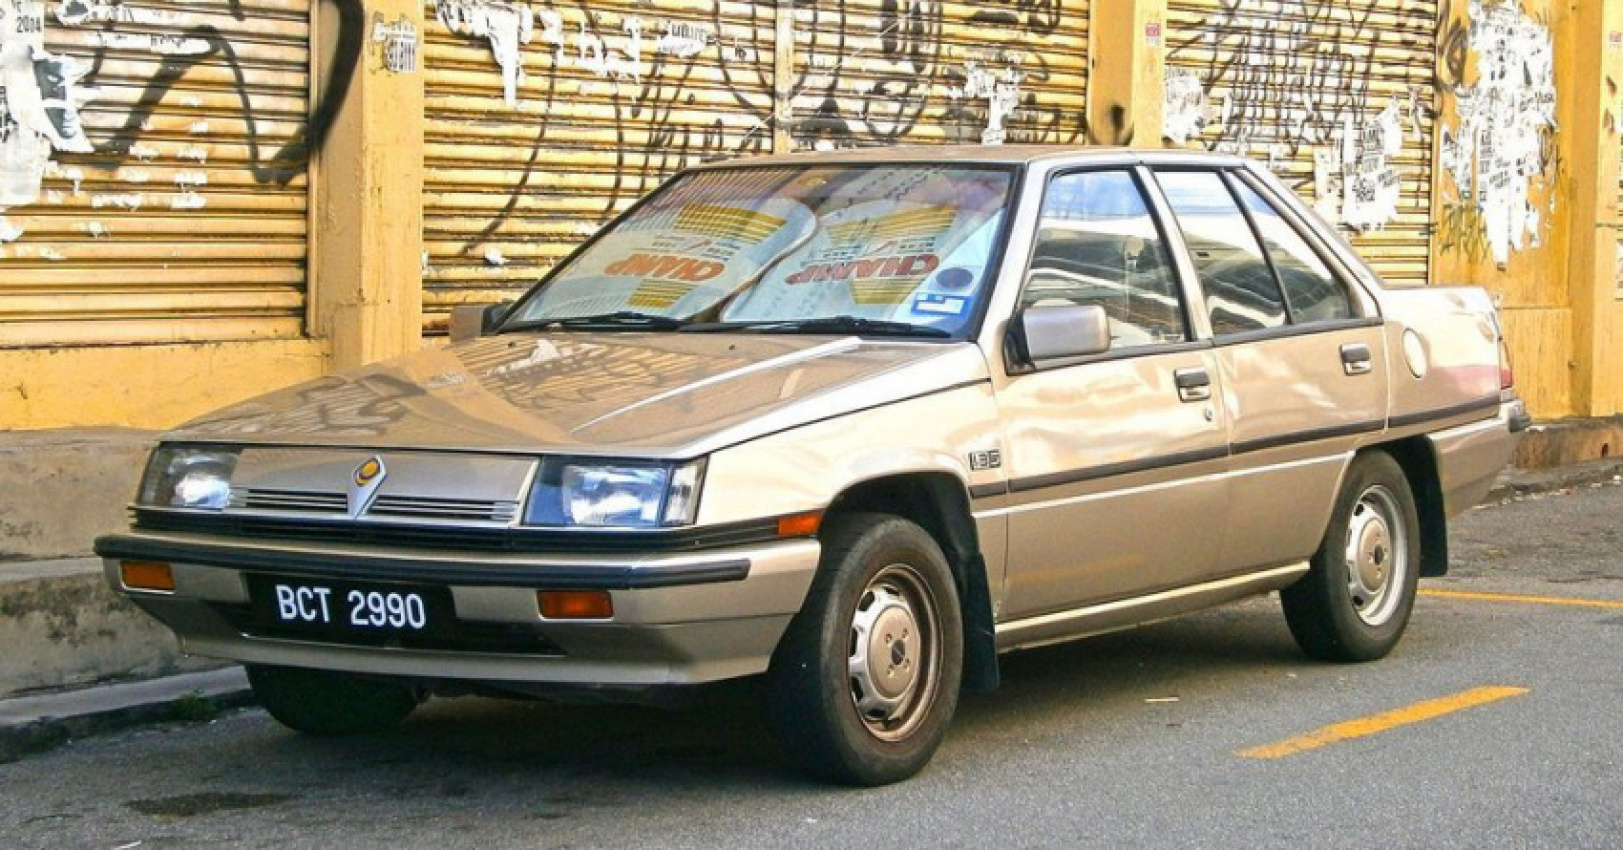 autos, cars, reviews, android, insights, proton, proton saga, saga, android, evolution of the proton saga - the 35 year old journey